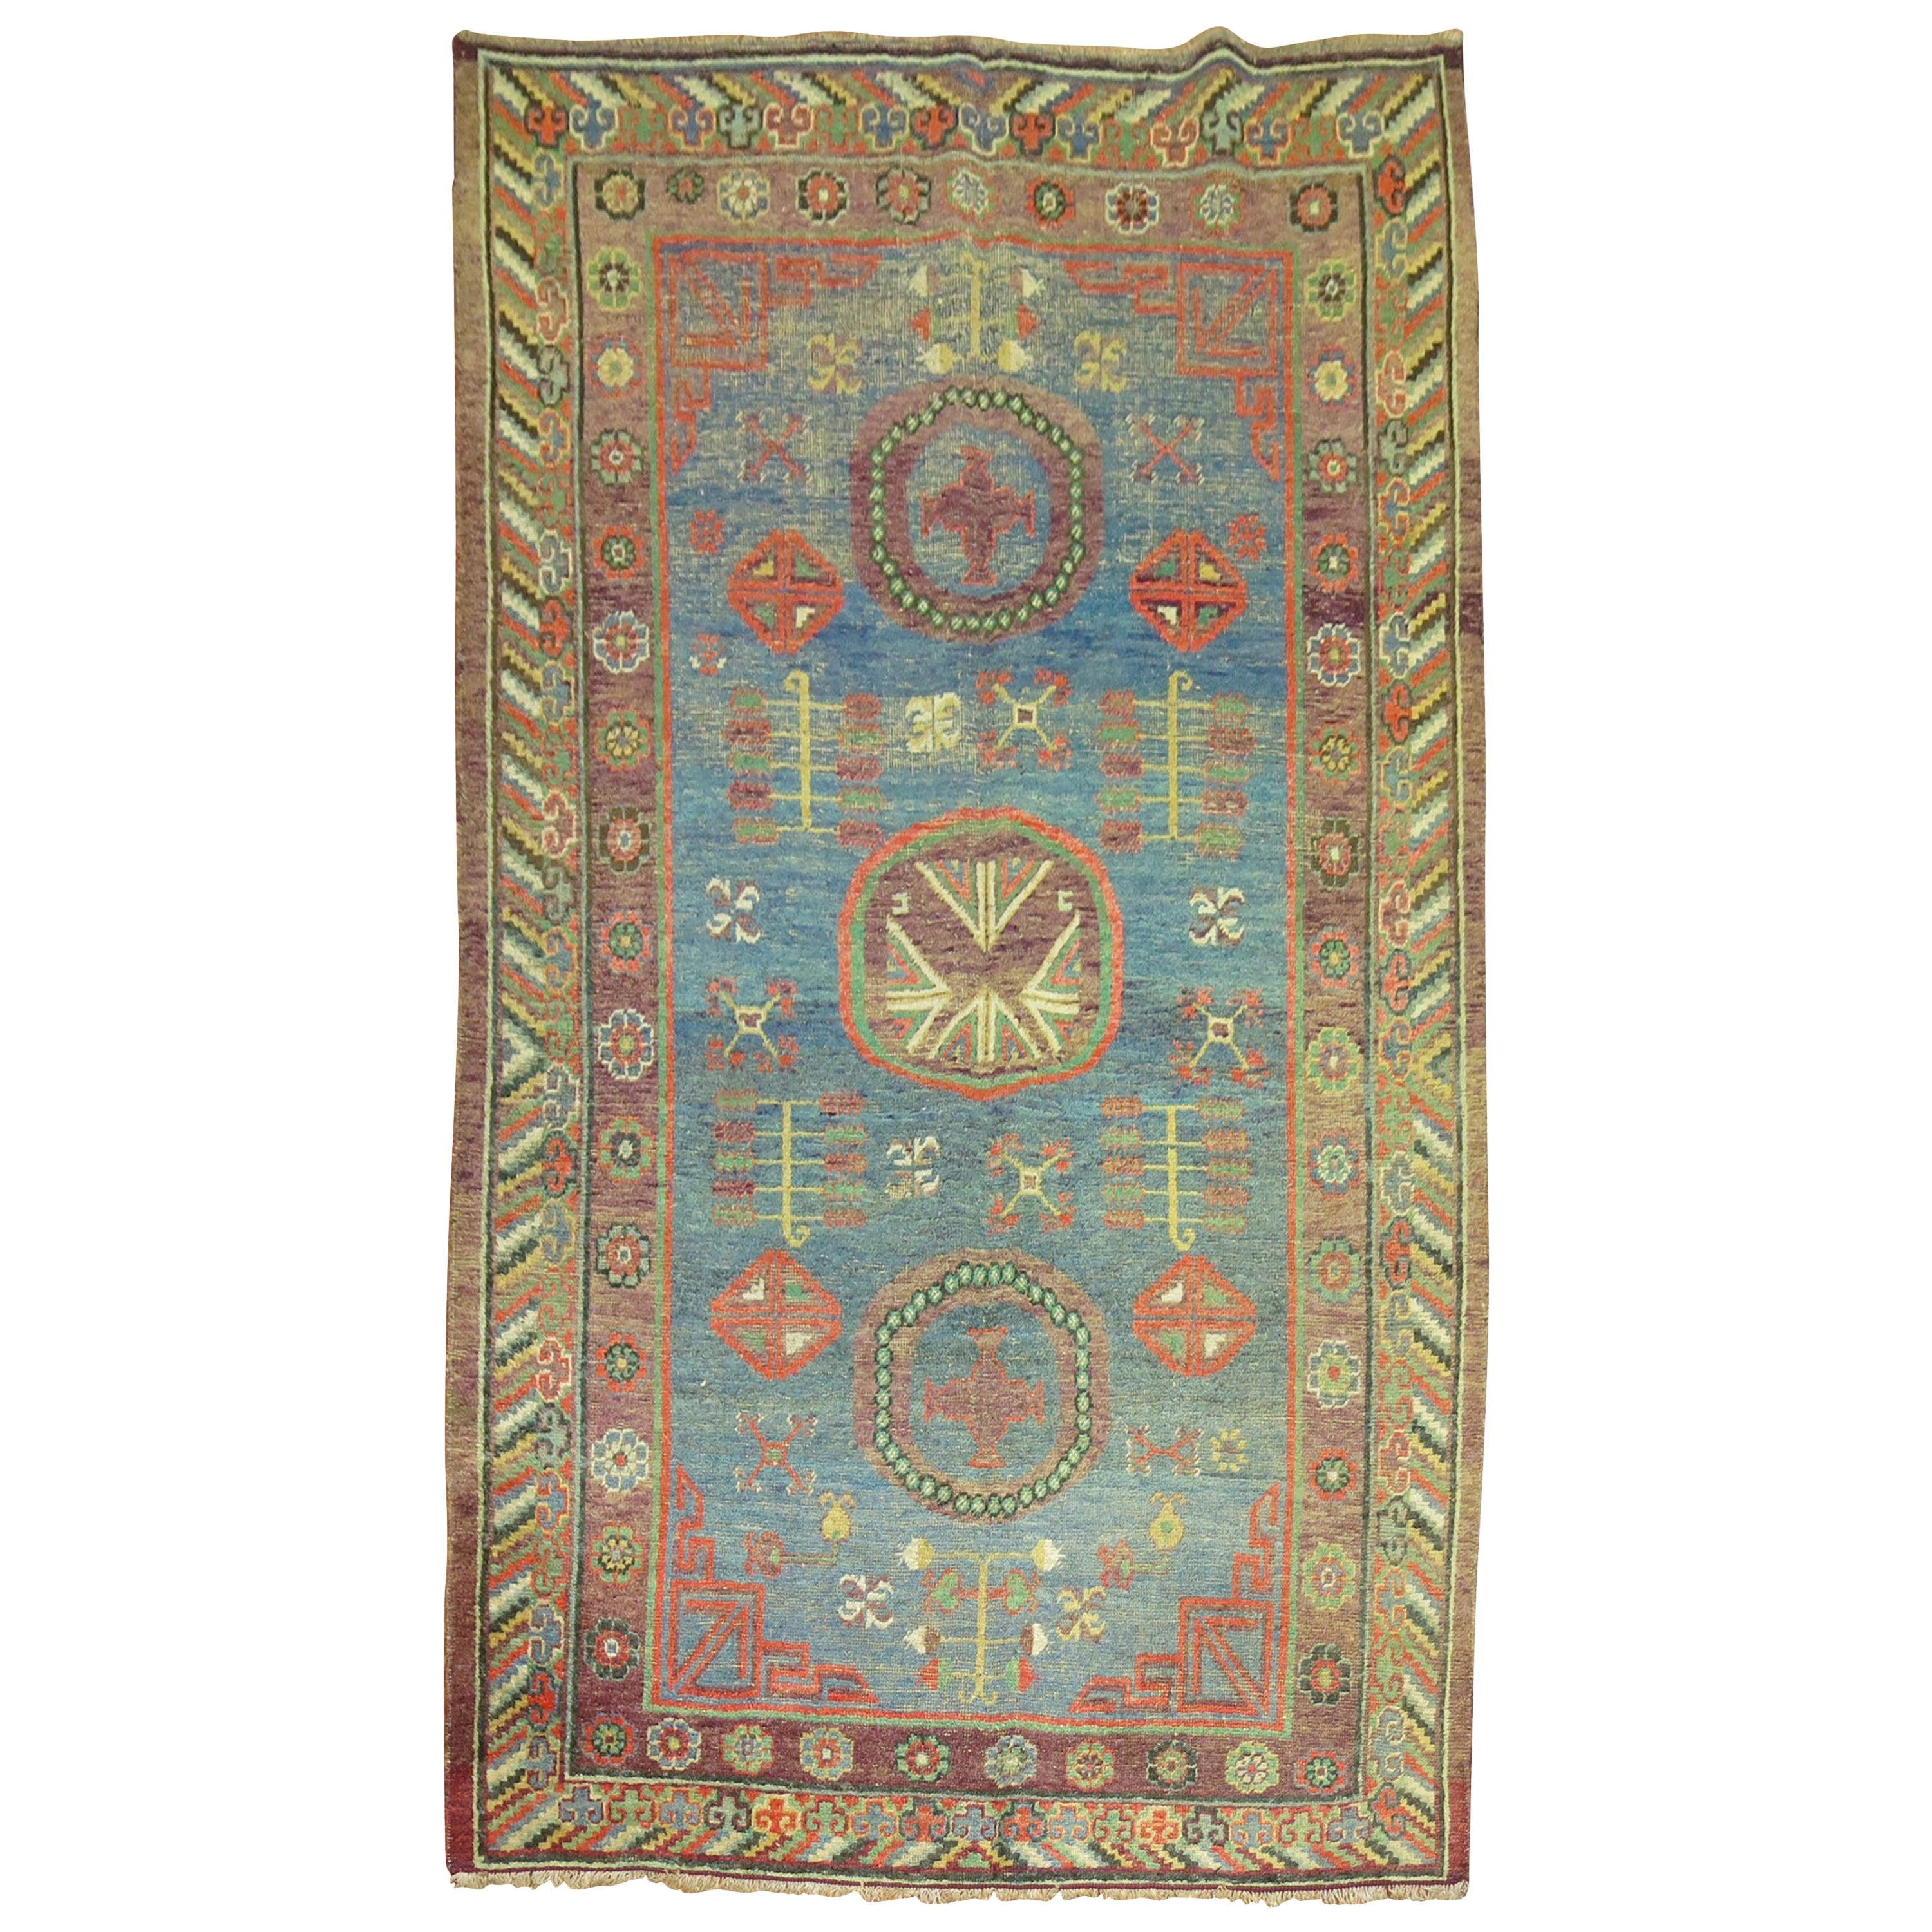 Whimisical Blue Early 20th Century Khotan Antique Rug